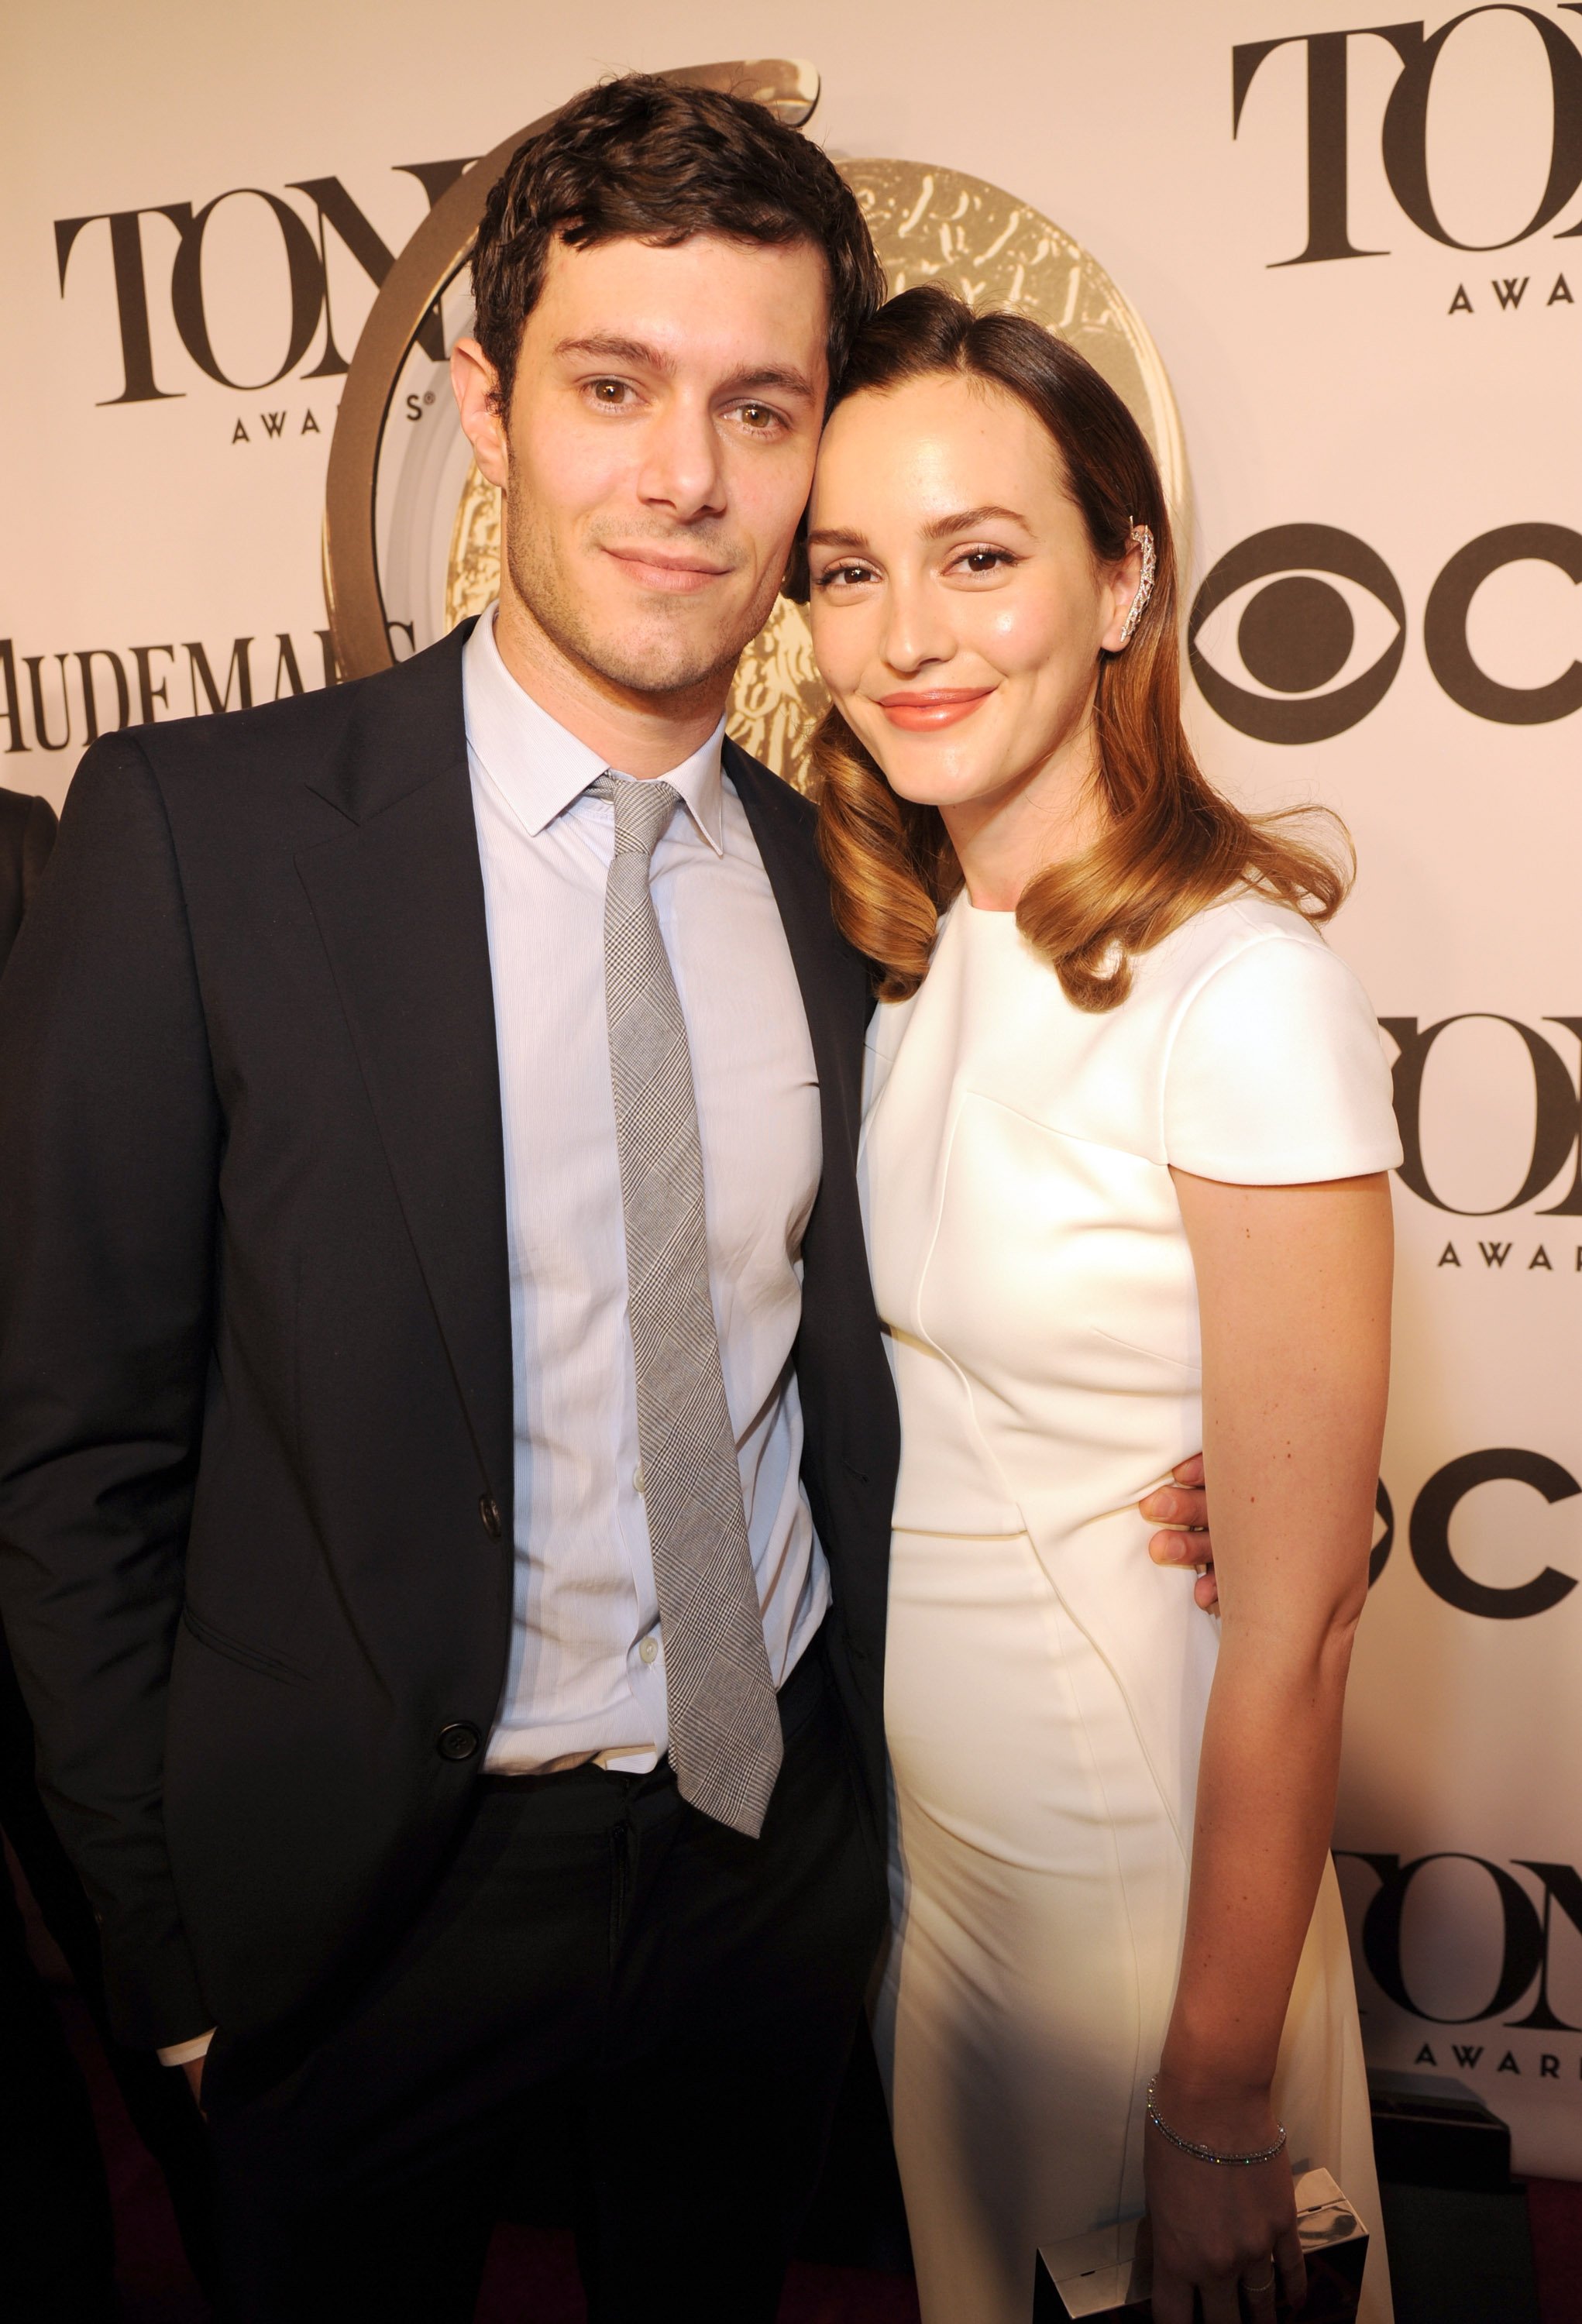 Adam Brody and Leighton Meester at the American Theatre Wing's 68th Annual Tony Awards, June 2014 | Source: Getty Images